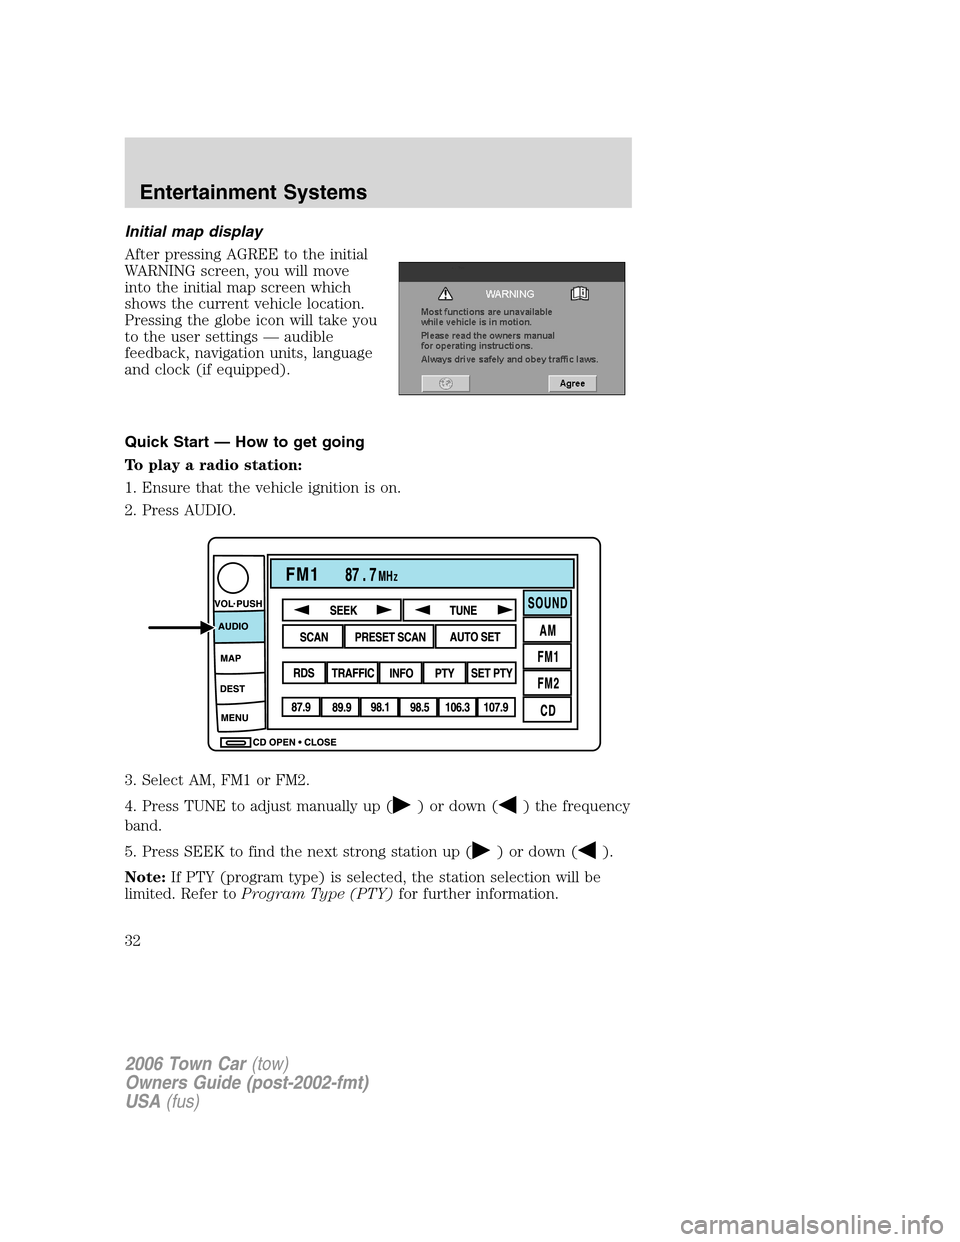 LINCOLN TOWN CAR 2006 User Guide Initial map display
After pressing AGREE to the initial
WARNING screen, you will move
into the initial map screen which
shows the current vehicle location.
Pressing the globe icon will take you
to the